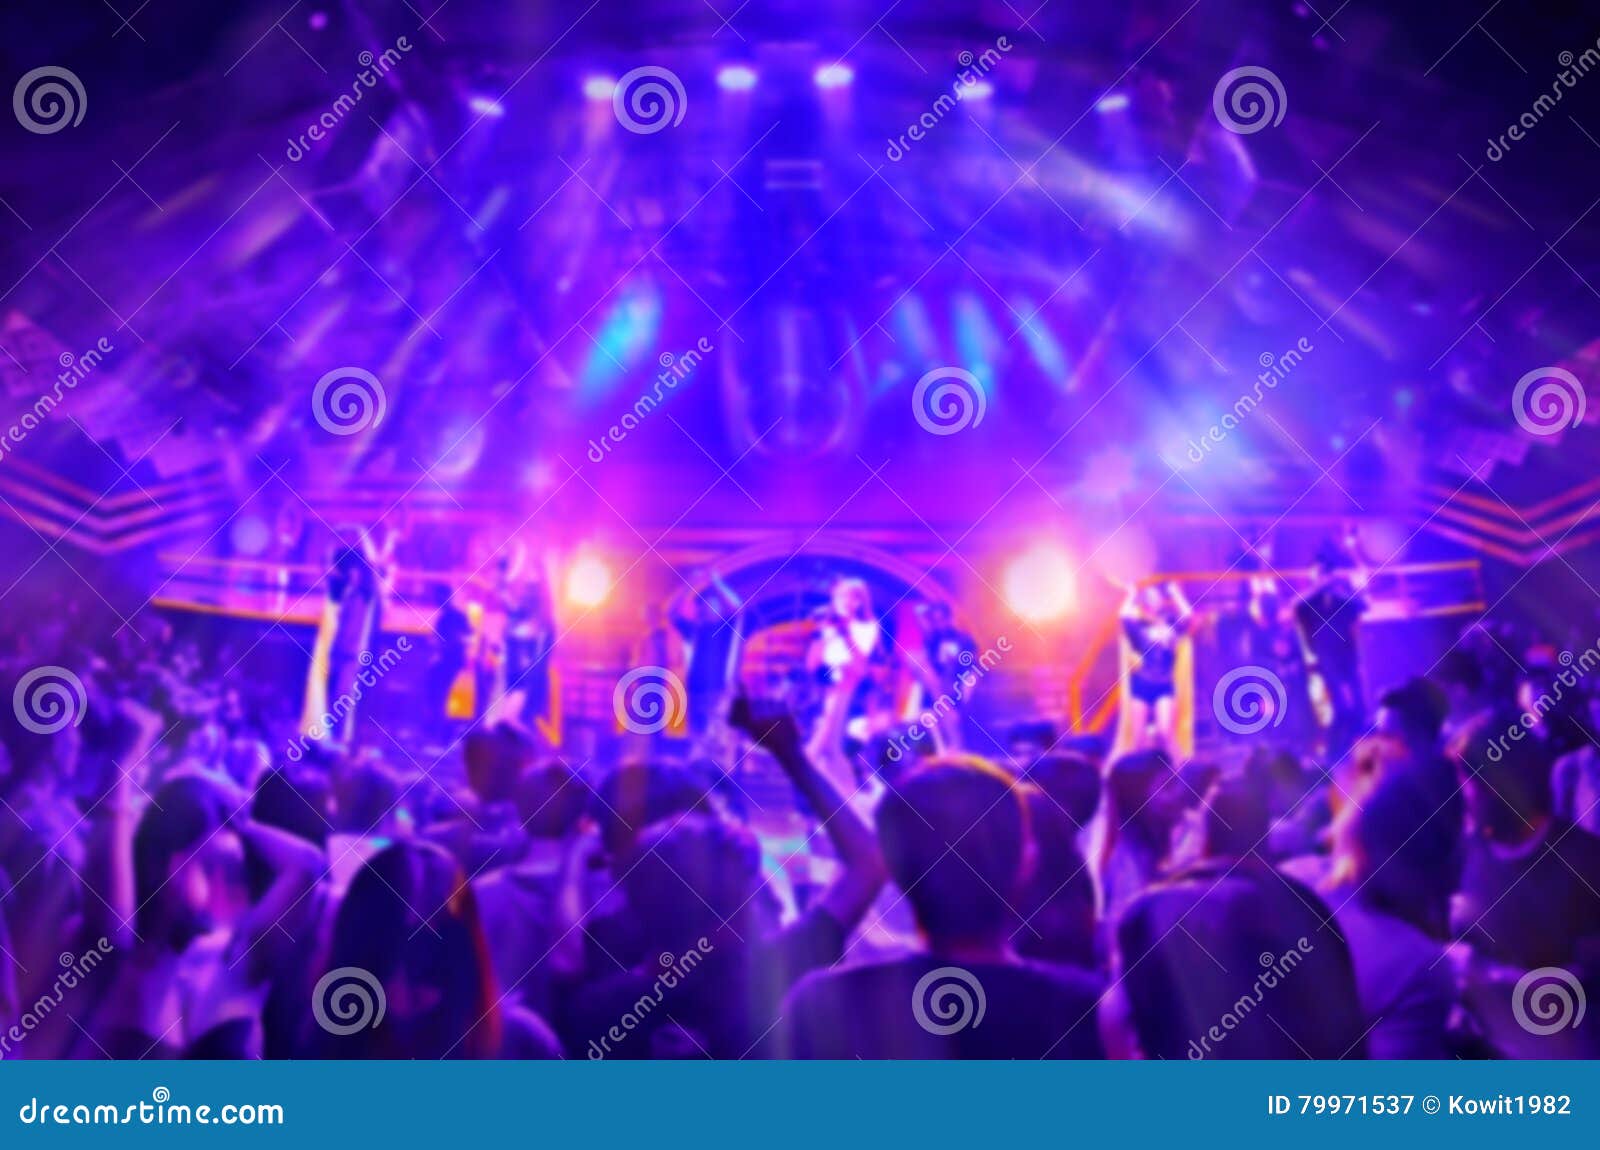 Stock Photo Blurred For Background Night Club People During Concert In Night Club Party Man And Woman Have